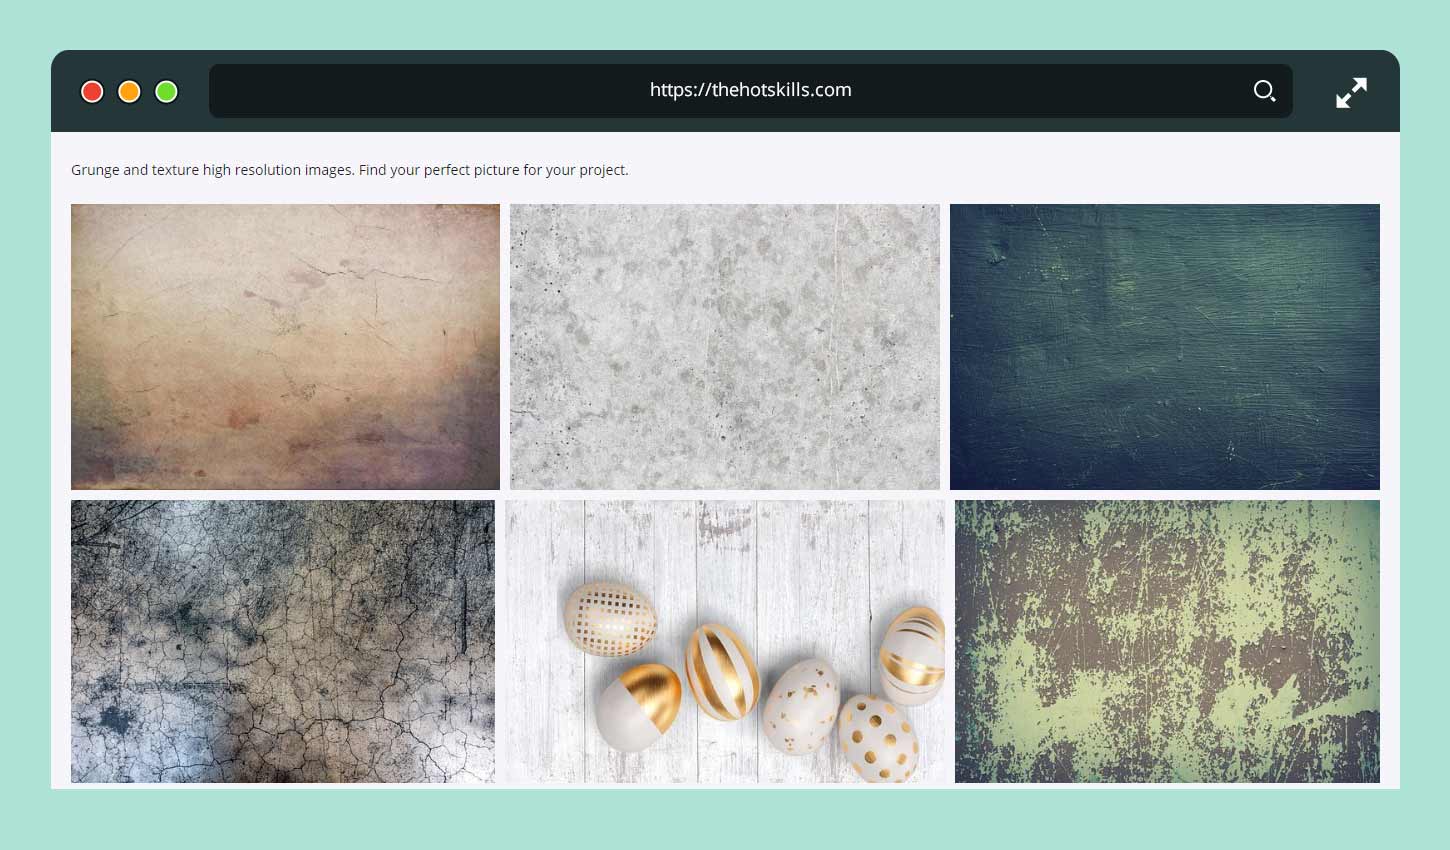 Grunge free textures, images and photos